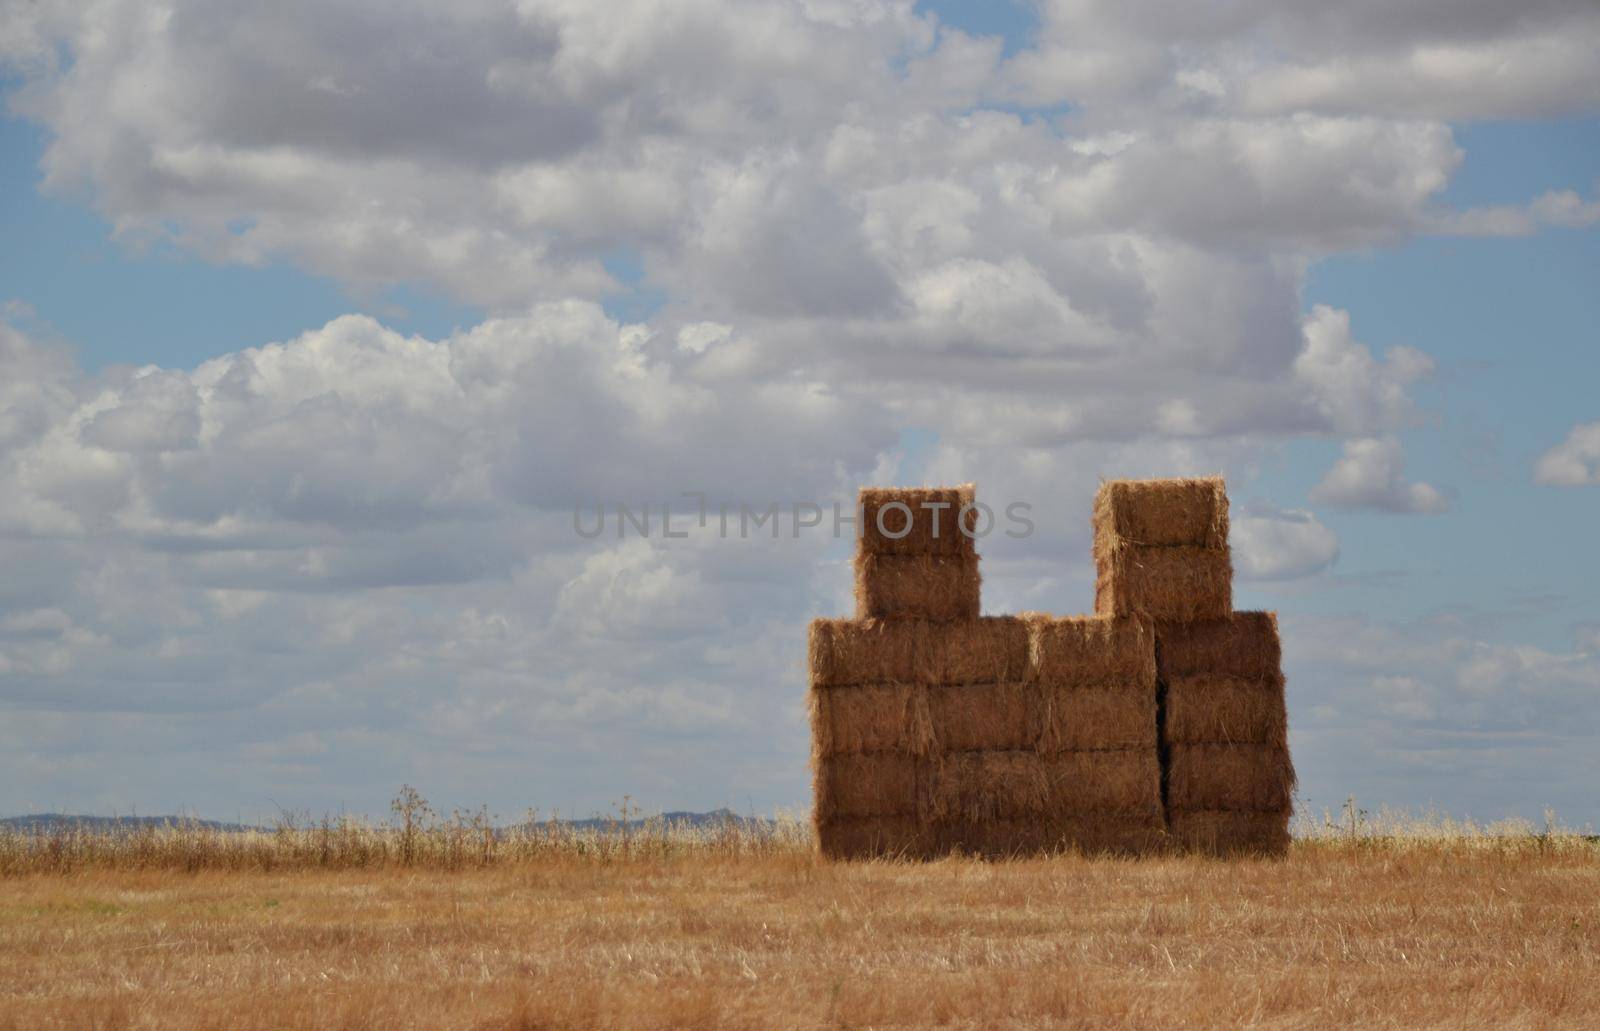 Straw bales piled up in the field waiting to be transported